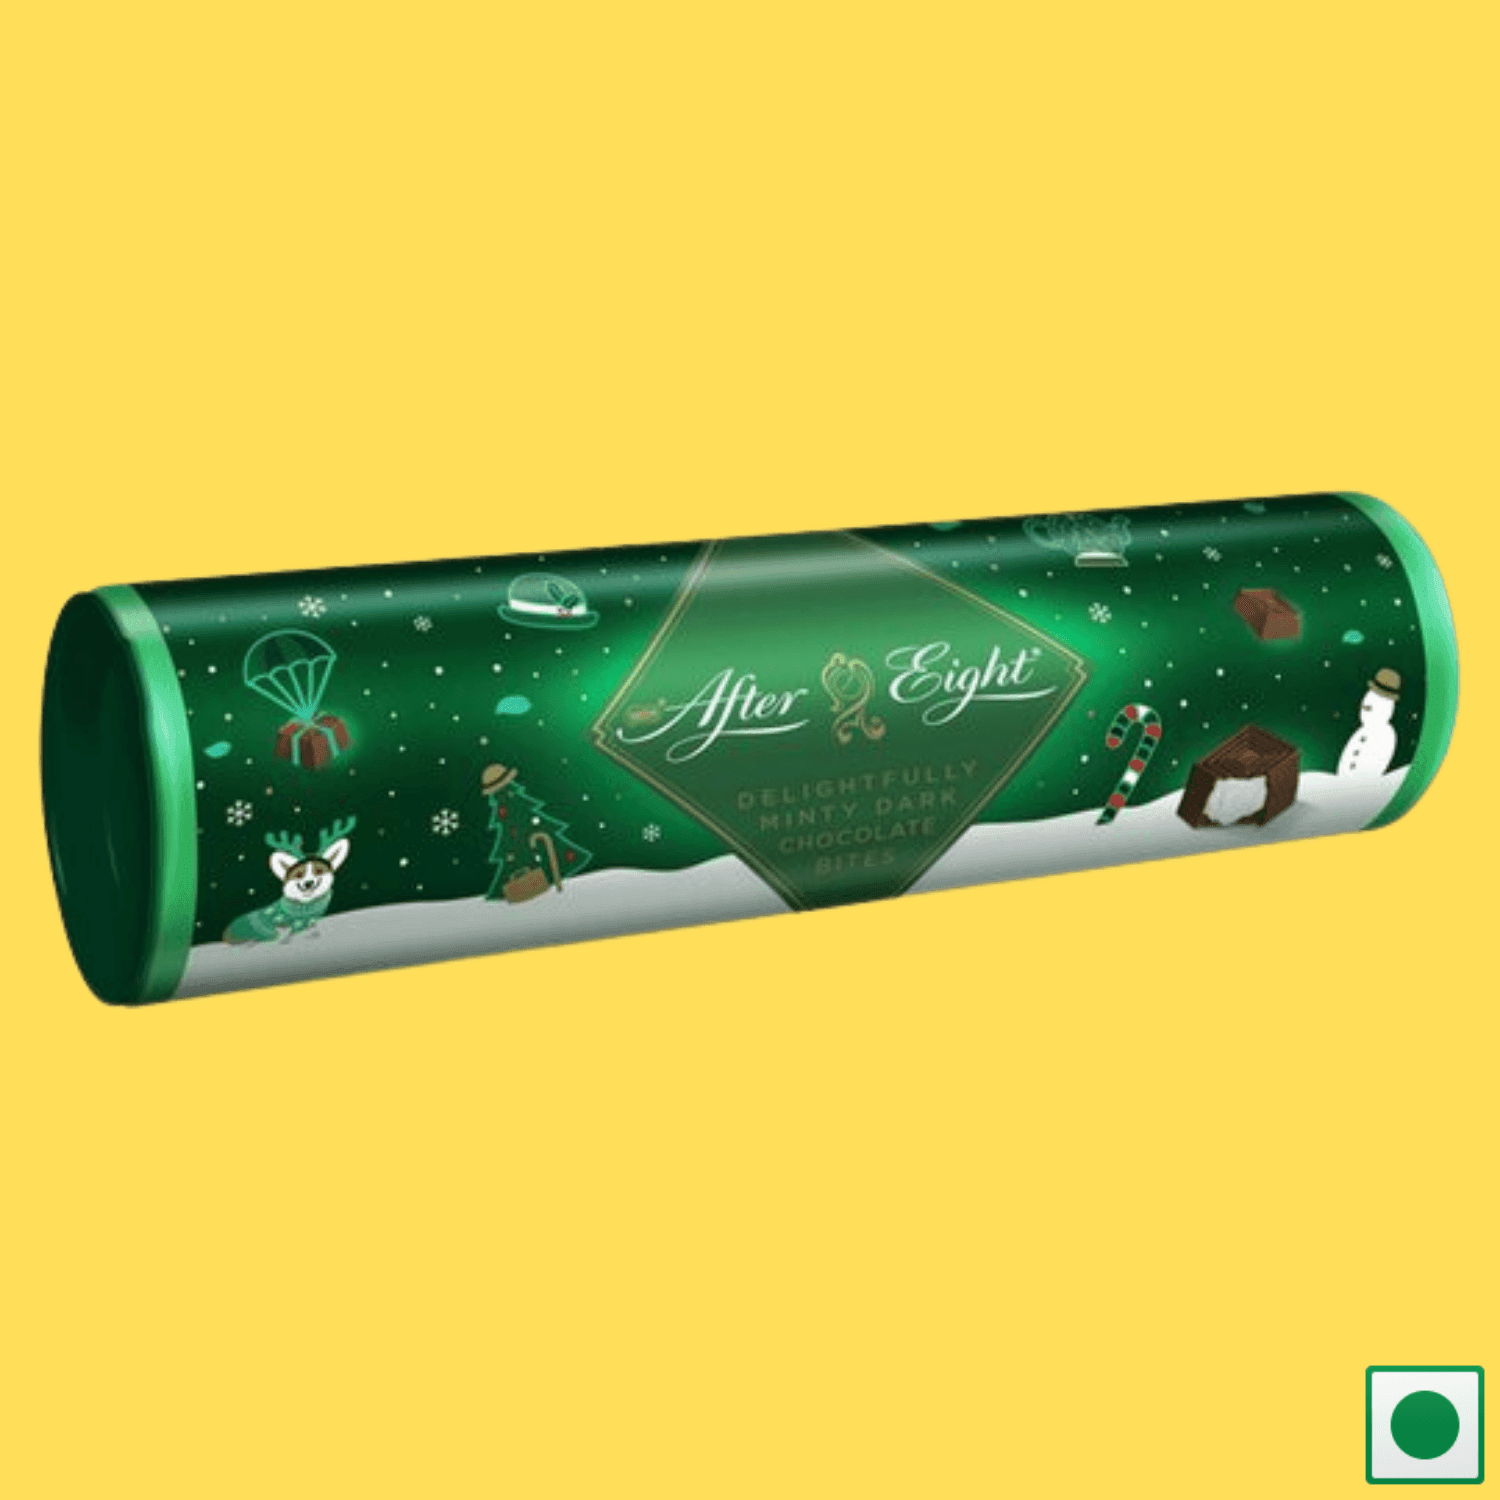 After Eight Dark Mint Chocolate Tube, 80g (Imported) - Super 7 Mart